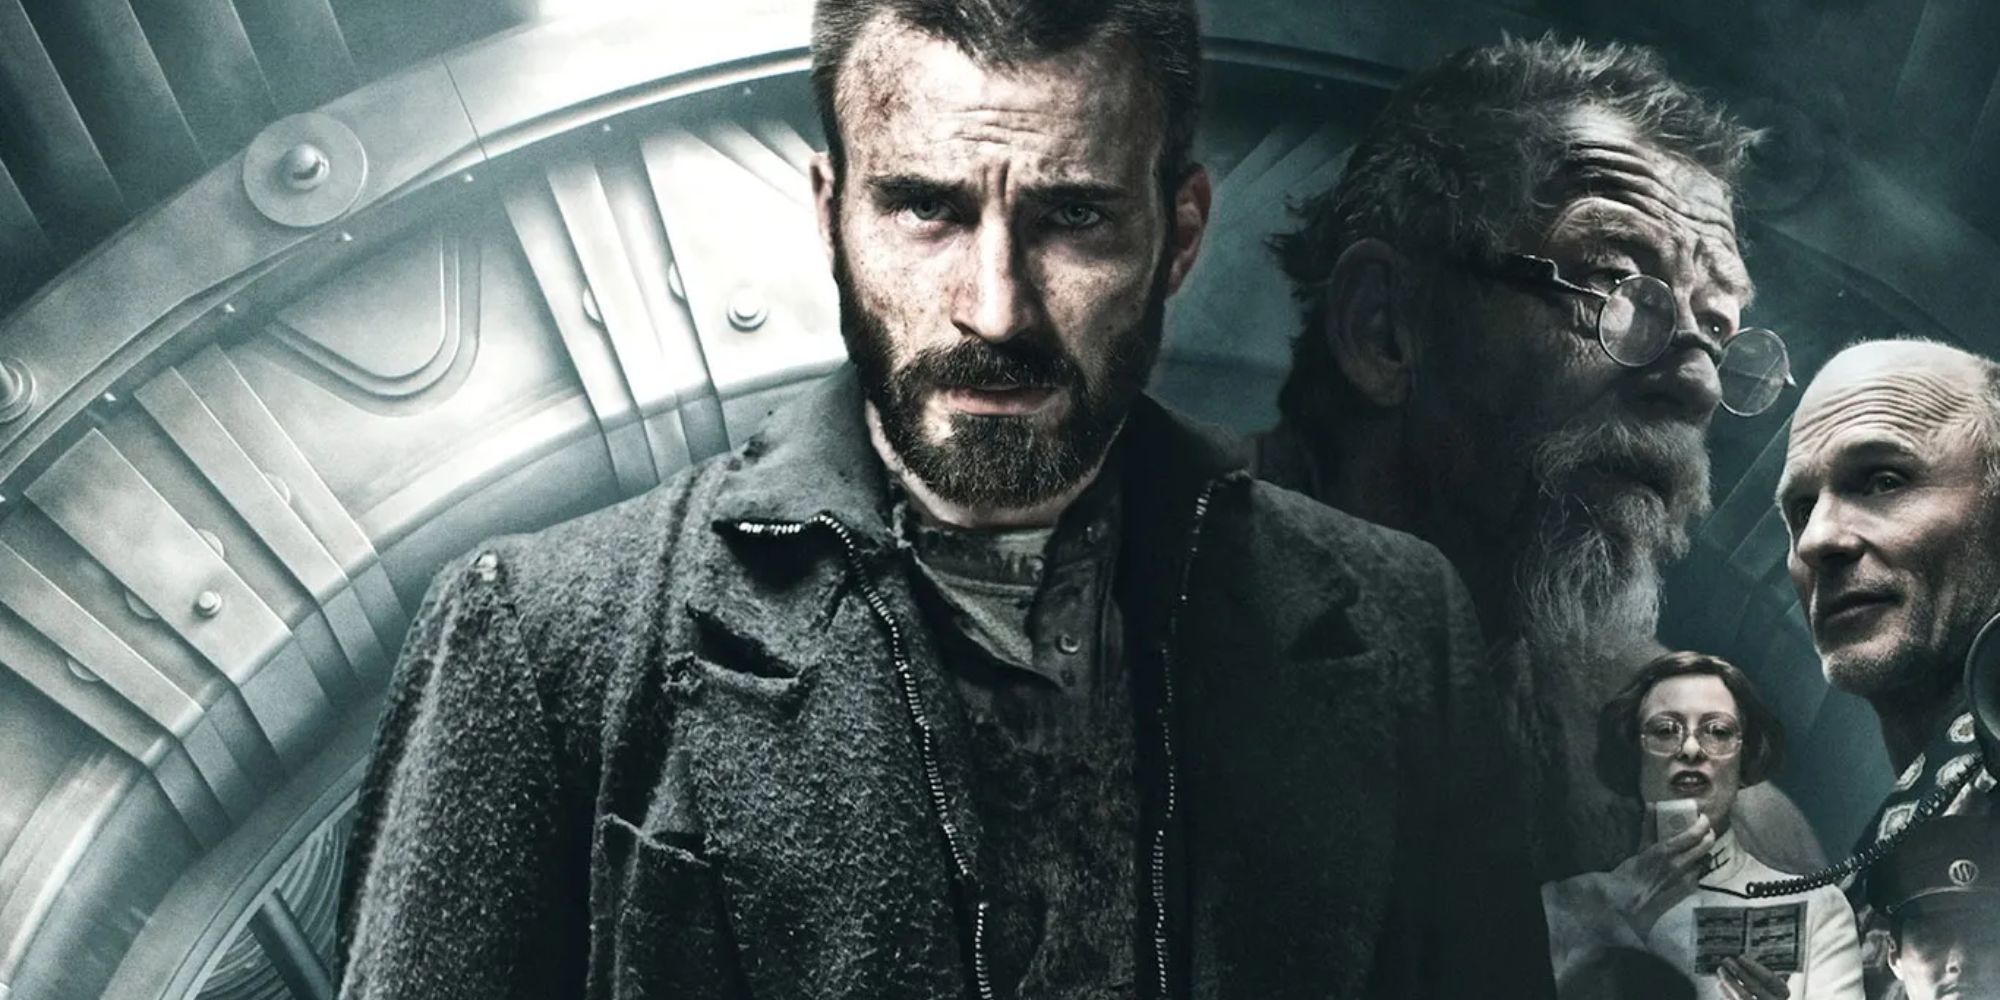 Promotional image featuring characters from 'Snowpiercer' (2013)